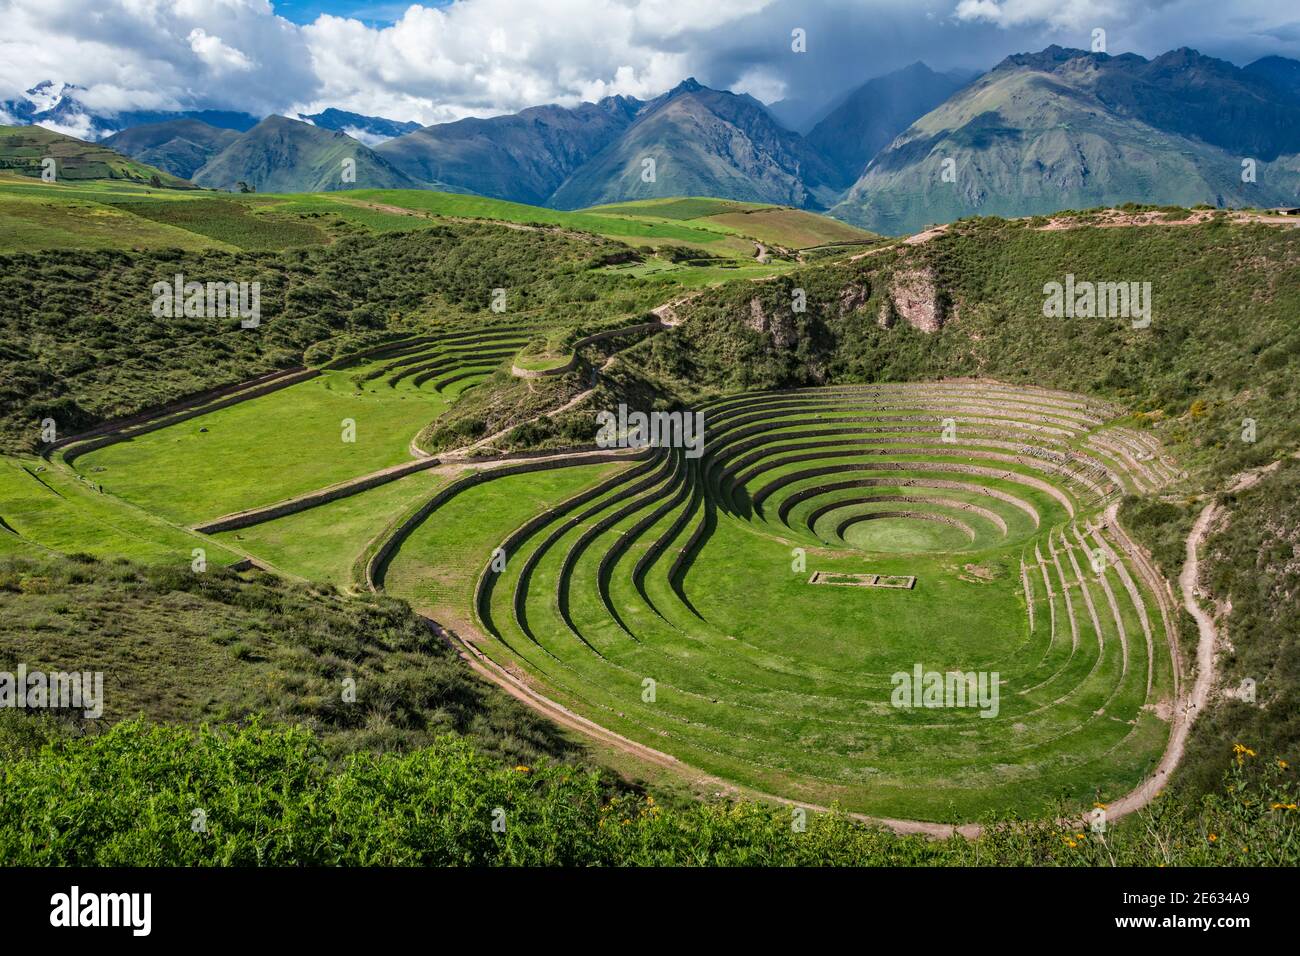 Circular terraces of the Inca agricultural site at Moray in Sacred Valley, Peru. Stock Photo